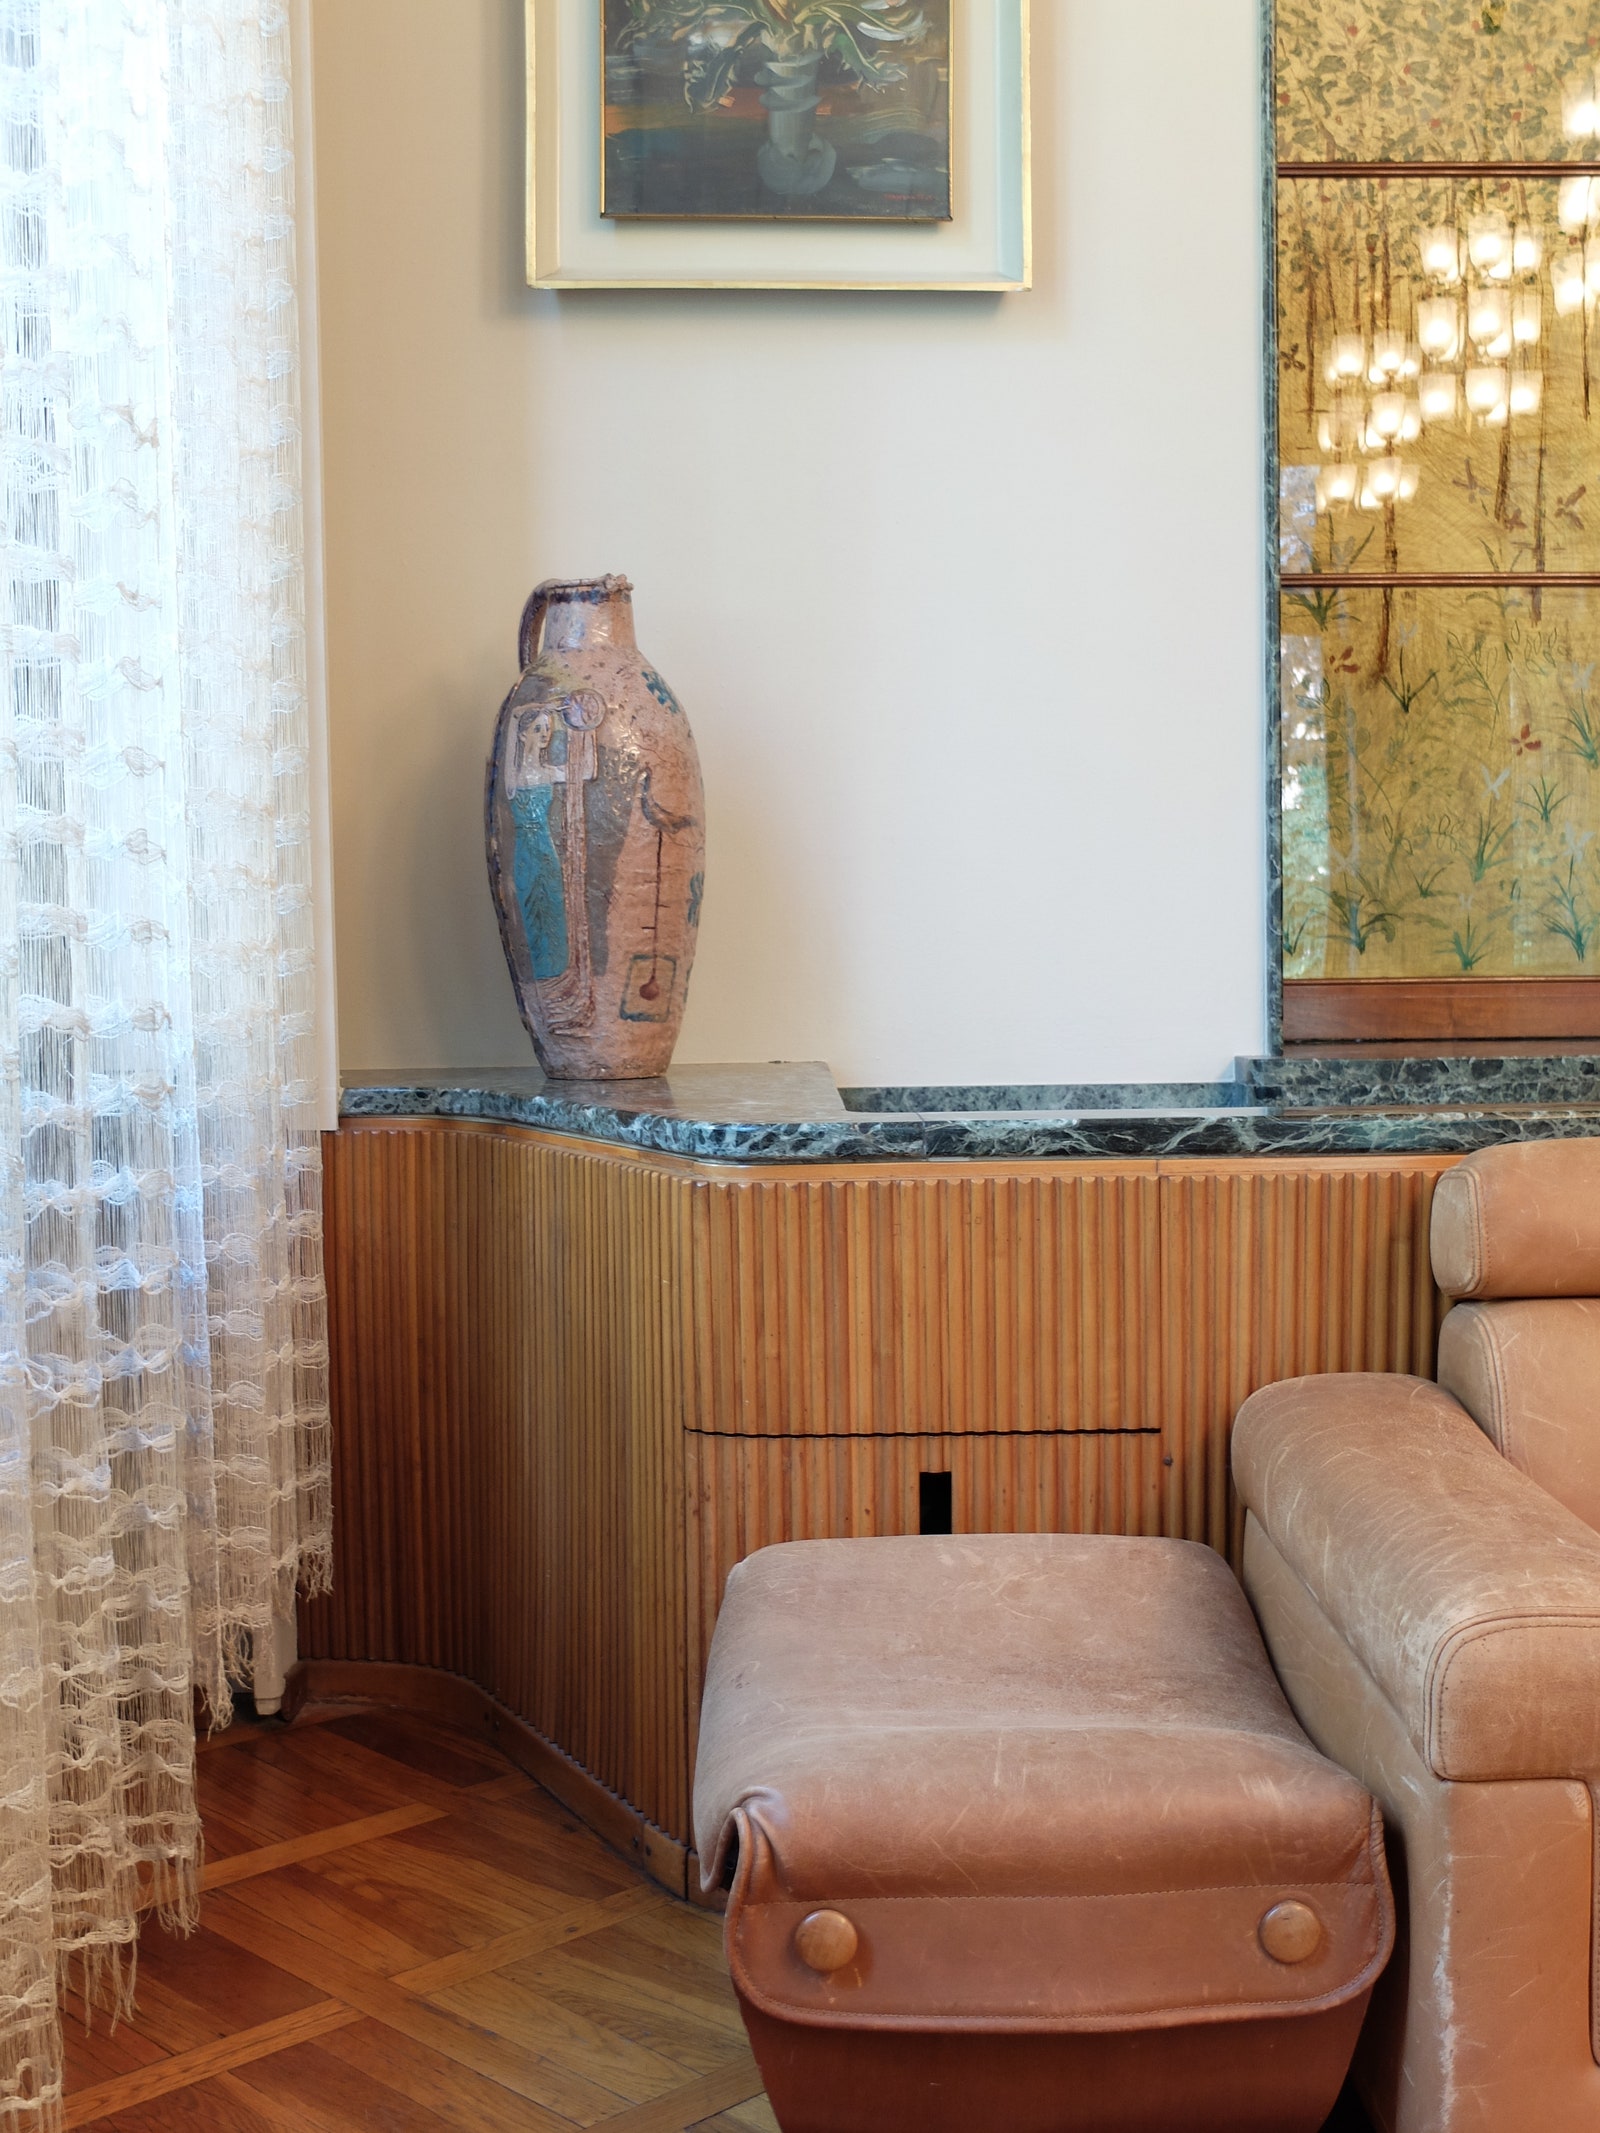 The builtin sideboard by Osvaldo Borsani in the living room creates a tambourlike effect. The designers father was the...